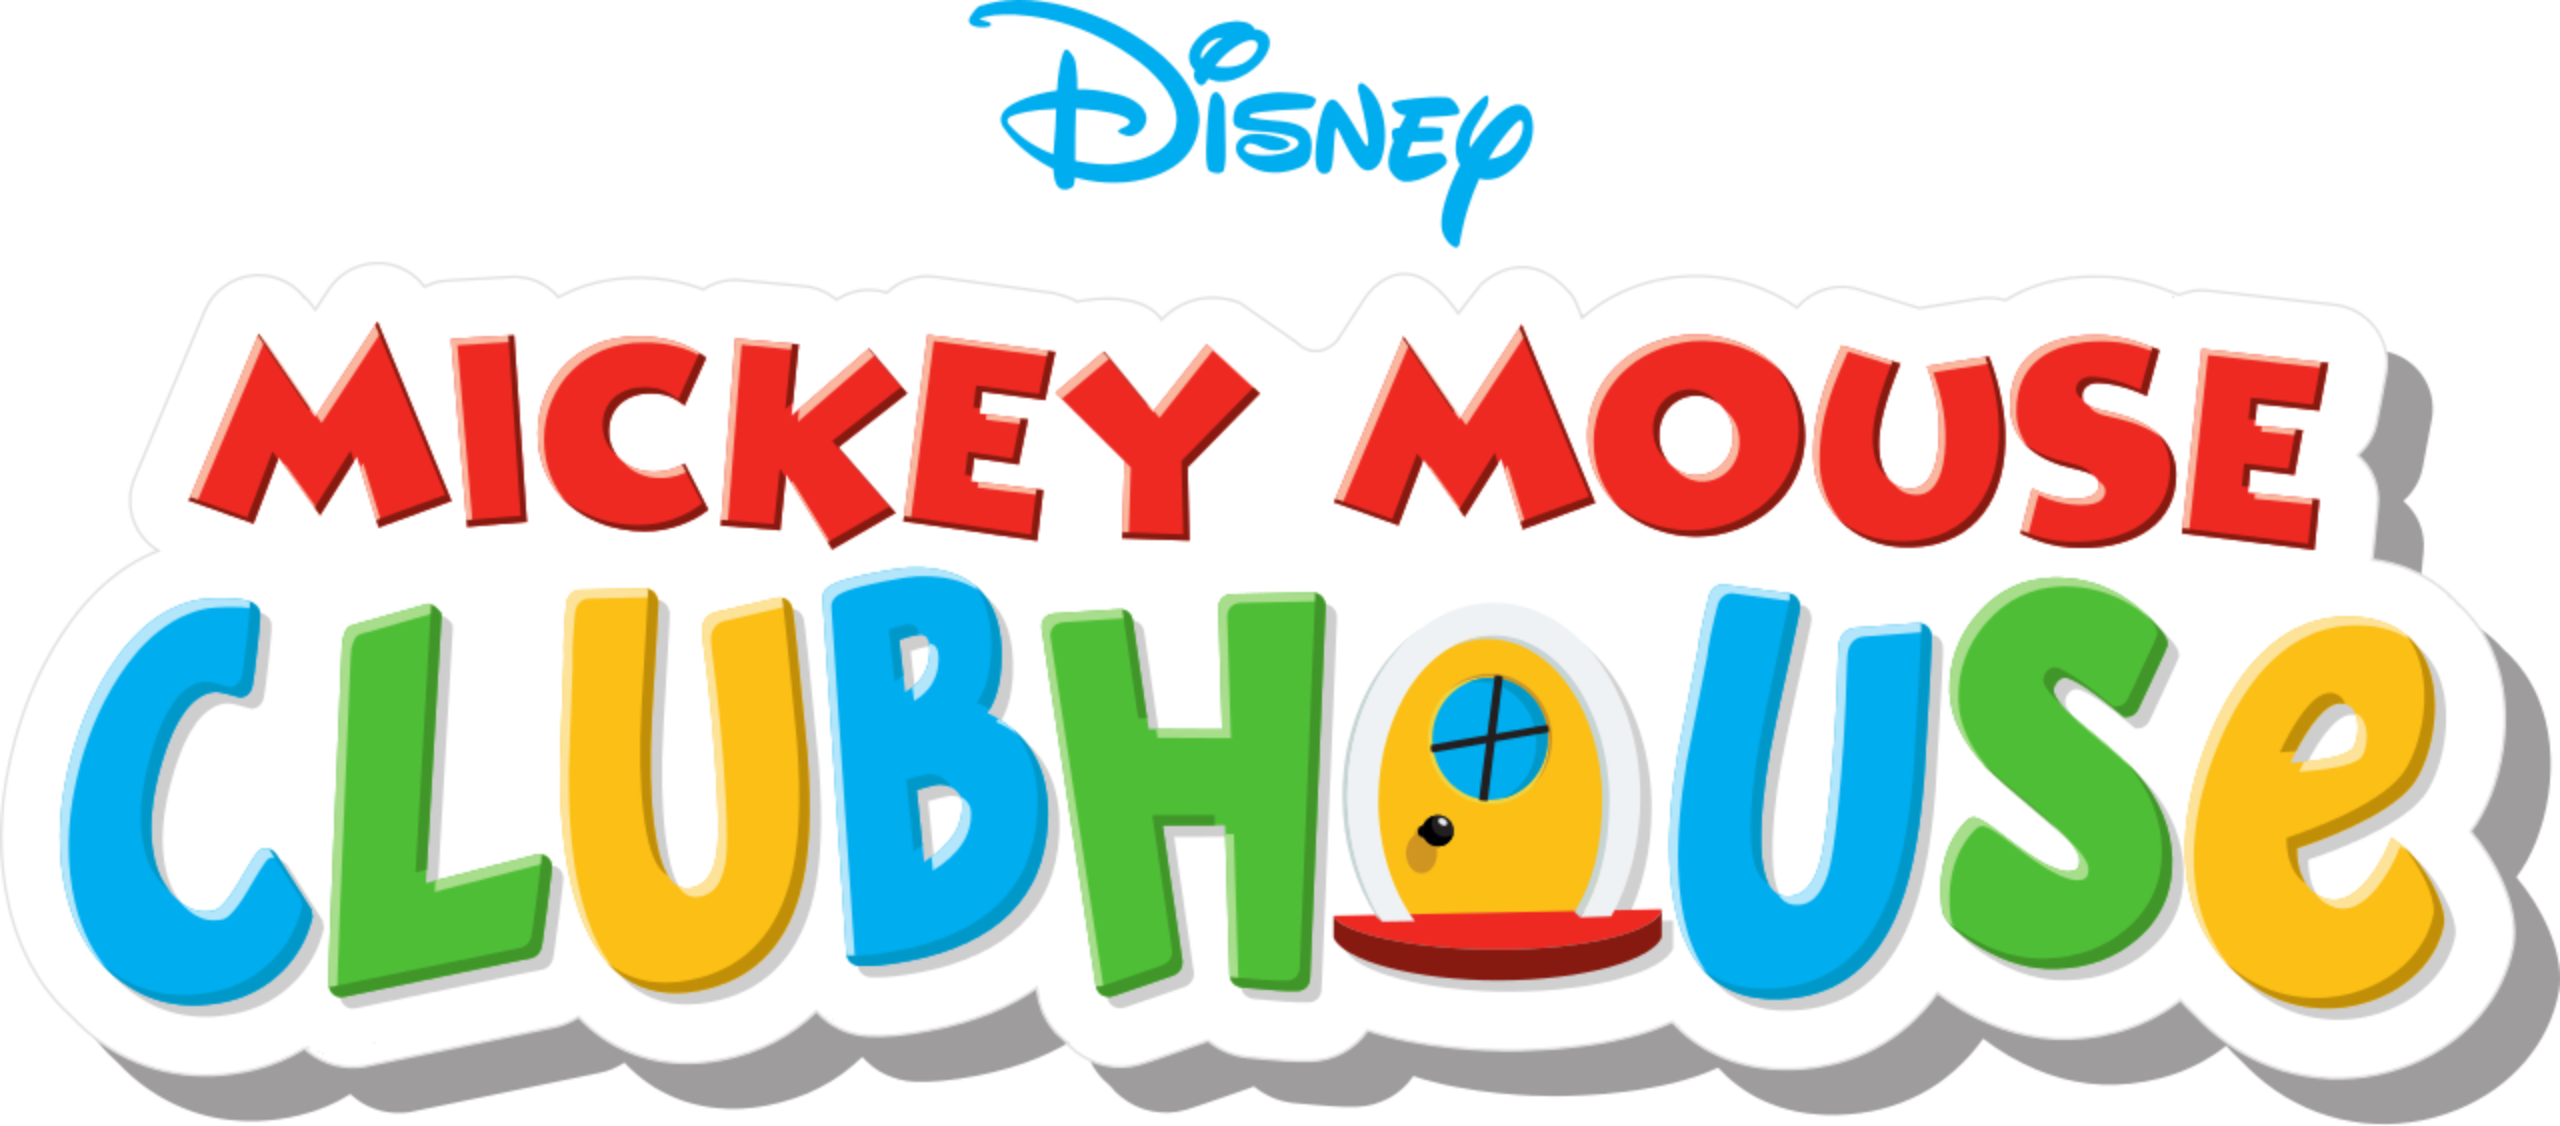 Mickey Mouse Clubhouse Volume 2 (6 DVDs Box Set)